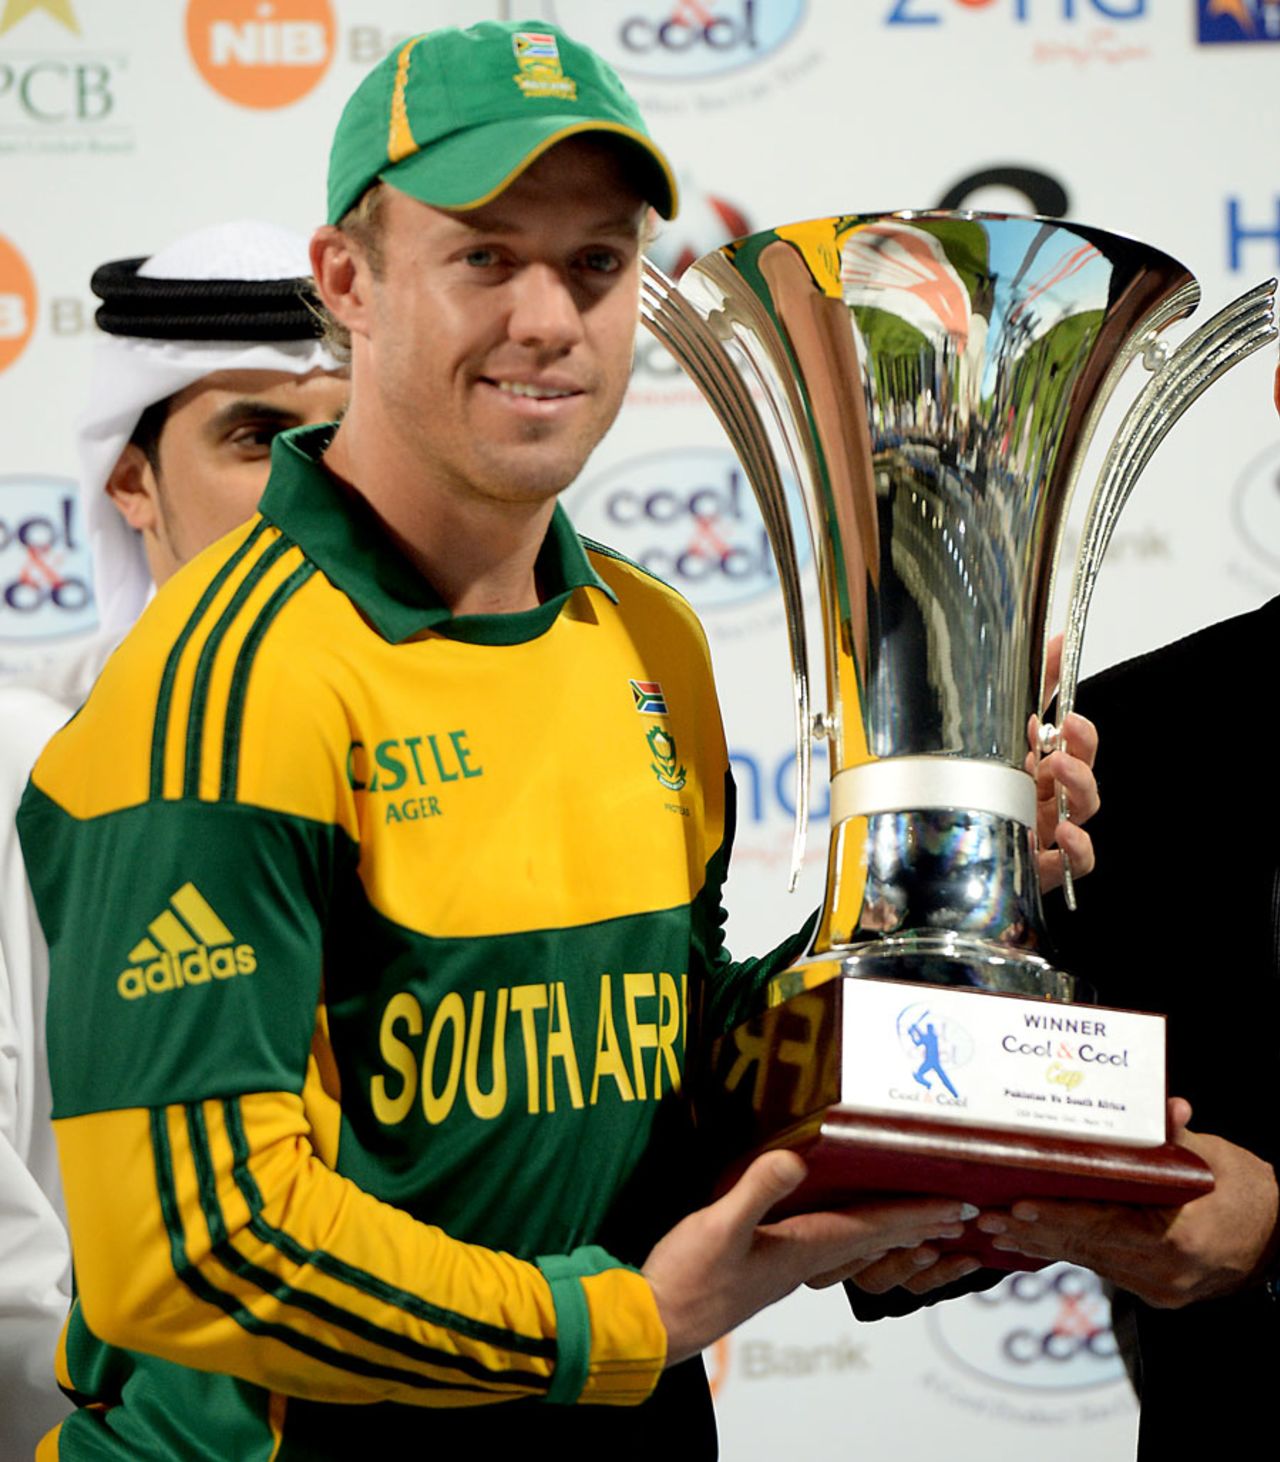 AB de Villiers poses with the winner's trophy, Pakistan v South Africa, 5th ODI, Sharjah, November 11, 2013